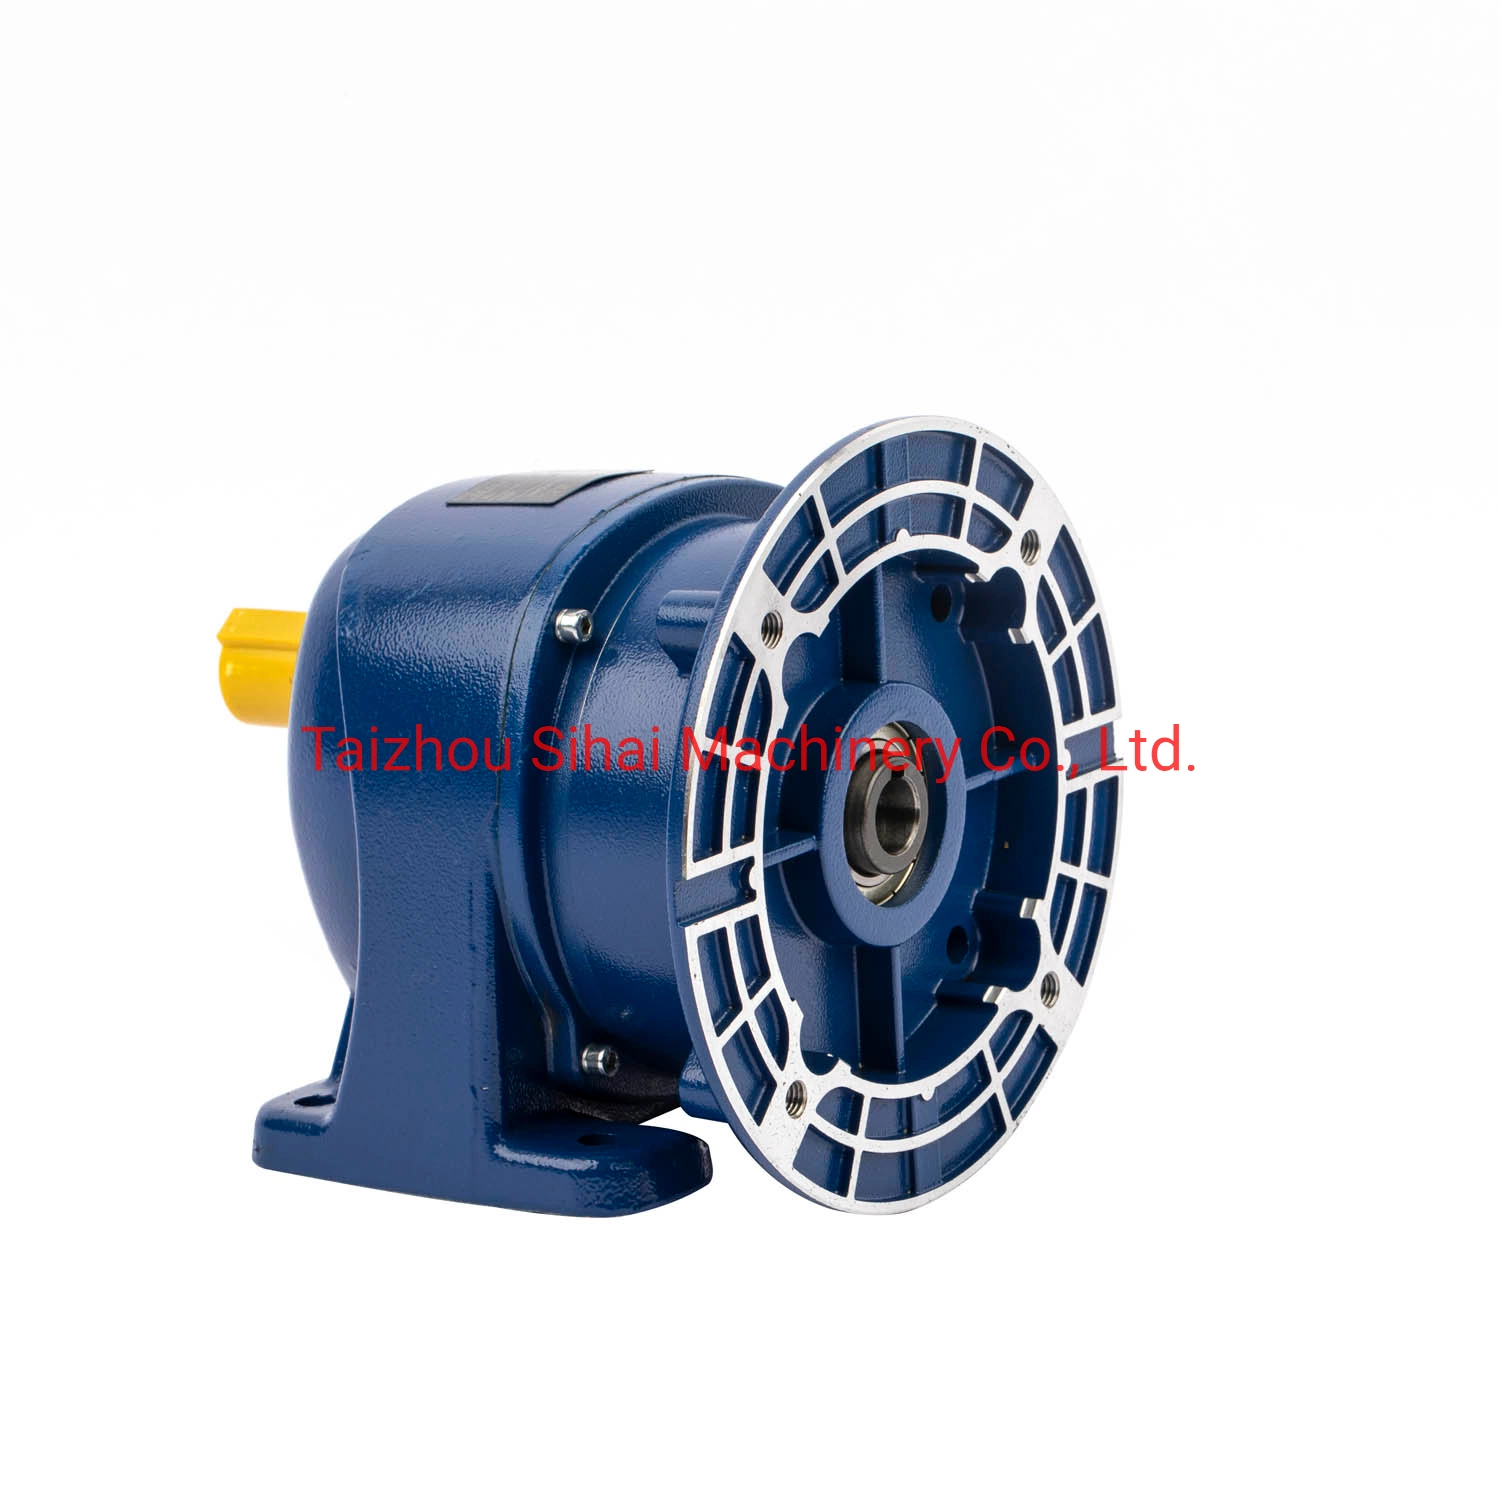 G3 Series Flange Mounted Helical Geared Motor with Solid Shaft Heliclal Geared Motor